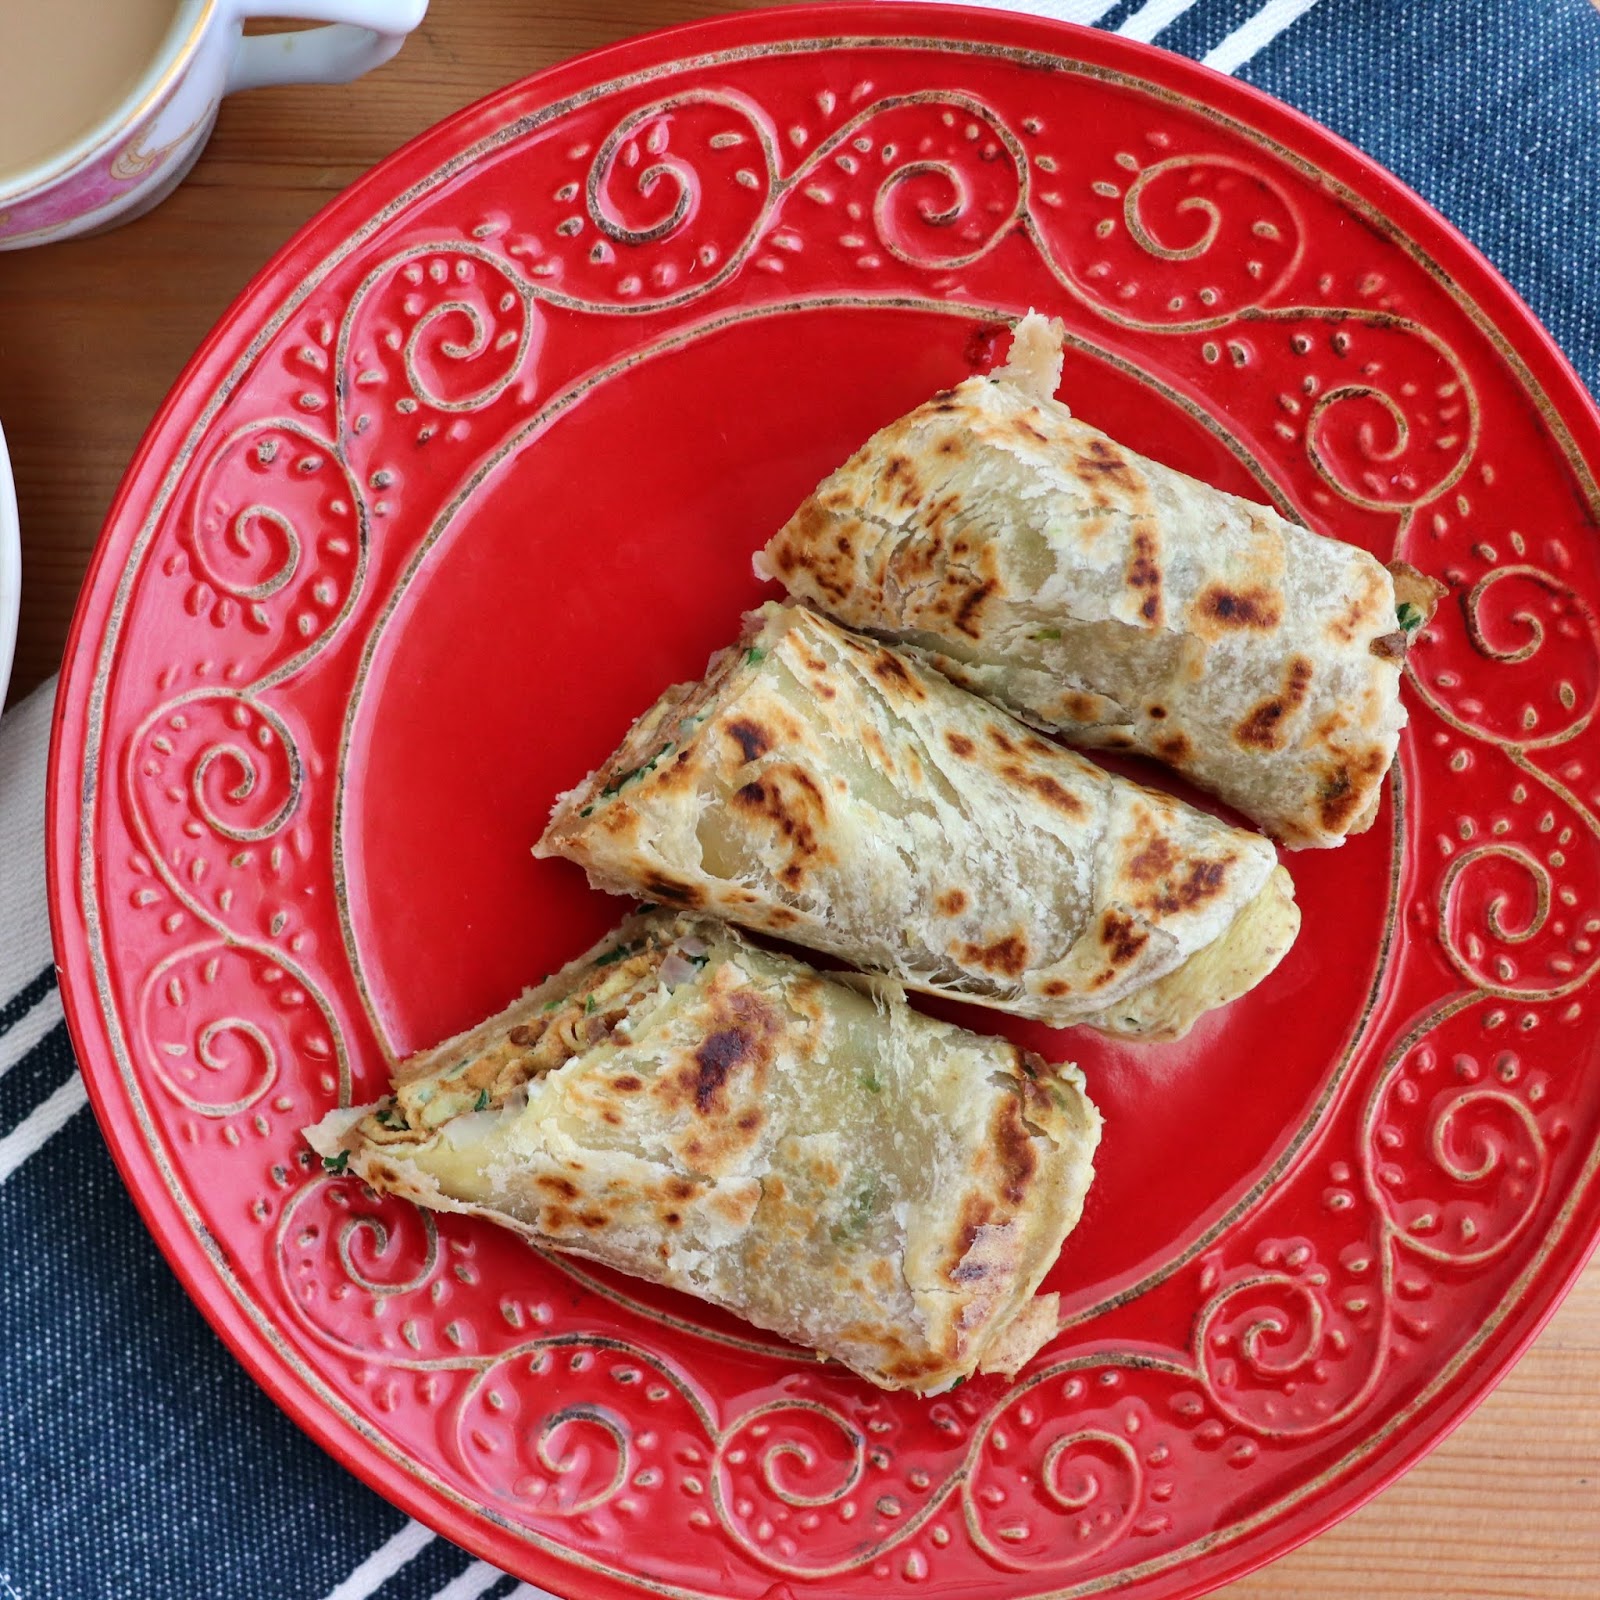 Torviewtoronto: Wraps made with frozen parathas and meal ideas